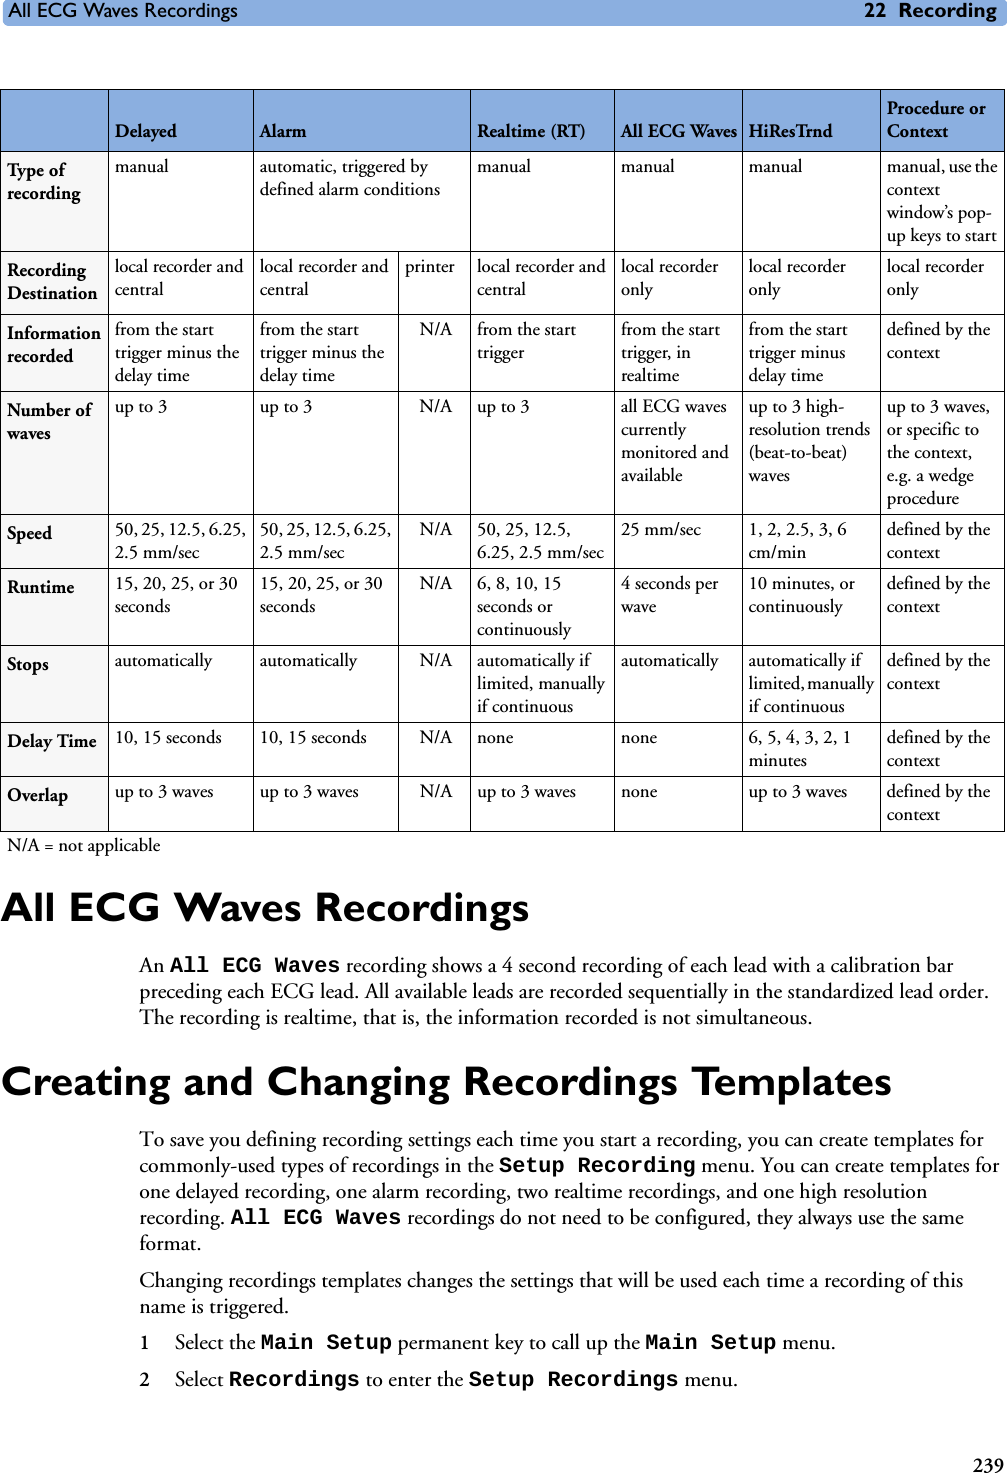 All ECG Waves Recordings 22 Recording239All ECG Waves RecordingsAn All ECG Waves recording shows a 4 second recording of each lead with a calibration bar preceding each ECG lead. All available leads are recorded sequentially in the standardized lead order. The recording is realtime, that is, the information recorded is not simultaneous. Creating and Changing Recordings TemplatesTo save you defining recording settings each time you start a recording, you can create templates for commonly-used types of recordings in the Setup Recording menu. You can create templates for one delayed recording, one alarm recording, two realtime recordings, and one high resolution recording. All ECG Waves recordings do not need to be configured, they always use the same format.Changing recordings templates changes the settings that will be used each time a recording of this name is triggered.1Select the Main Setup permanent key to call up the Main Setup menu.2Select Recordings to enter the Setup Recordings menu.Delayed Alarm Realtime (RT) All ECG Waves HiResTrndProcedure or ContextType of recording manual automatic, triggered by defined alarm conditions manual manual manual manual, use the context window’s pop-up keys to startRecording Destinationlocal recorder and central local recorder and central printer local recorder and centrallocal recorder onlylocal recorder onlylocal recorder onlyInformation recordedfrom the start trigger minus the delay timefrom the start trigger minus the delay timeN/A from the start triggerfrom the start trigger, in realtimefrom the start trigger minus delay timedefined by the contextNumber of wavesup to 3  up to 3  N/A up to 3 all ECG waves currently monitored and availableup to 3 high-resolution trends (beat-to-beat) wavesup to 3 waves, or specific to the context, e.g. a wedge procedureSpeed 50, 25, 12.5, 6.25, 2.5 mm/sec50, 25, 12.5, 6.25, 2.5 mm/secN/A 50, 25, 12.5, 6.25, 2.5 mm/sec25 mm/sec 1, 2, 2.5, 3, 6 cm/mindefined by the contextRuntime 15, 20, 25, or 30 seconds15, 20, 25, or 30 secondsN/A 6, 8, 10, 15 seconds or continuously4 seconds per wave10 minutes, or continuouslydefined by the contextStops automatically automatically N/A automatically if limited, manually if continuousautomatically automatically if limited, manually if continuousdefined by the contextDelay Time 10, 15 seconds 10, 15 seconds N/A none none 6, 5, 4, 3, 2, 1 minutesdefined by the contextOverlap up to 3 waves up to 3 waves N/A up to 3 waves none up to 3 waves defined by the contextN/A = not applicable